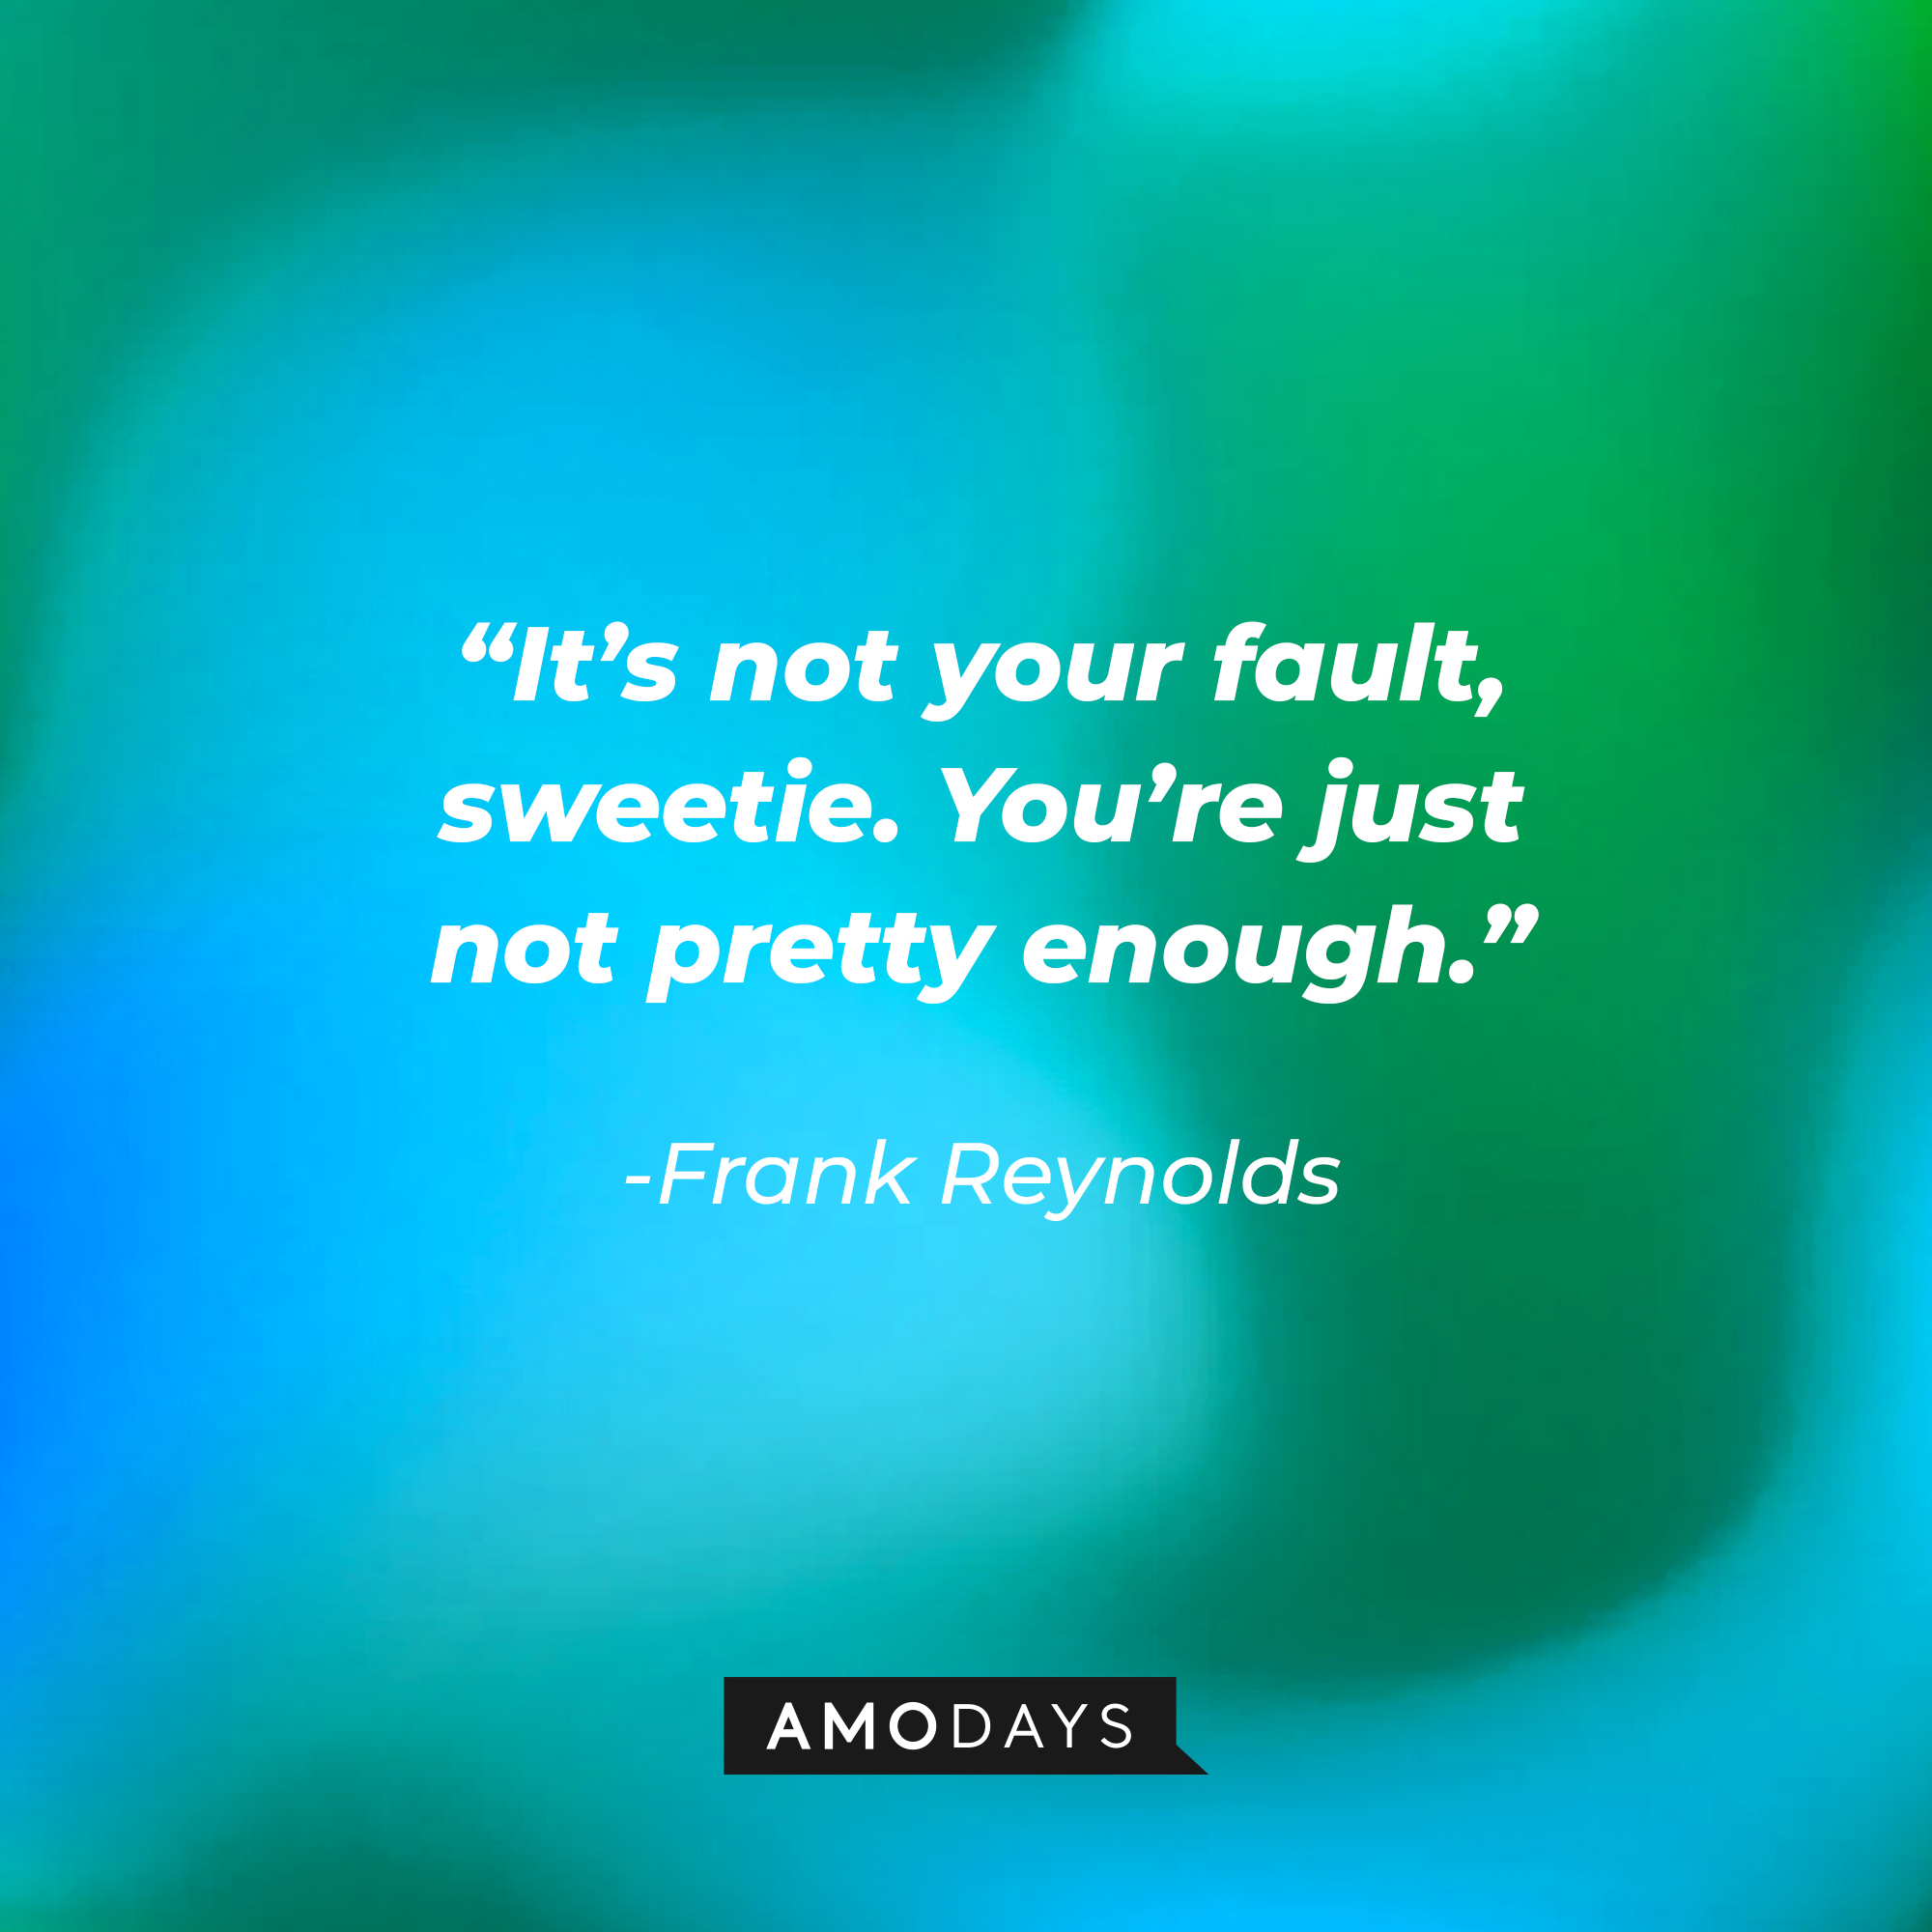 Frank Reynolds quote: “It’s not your fault, sweetie. You’re just not pretty enough.” | Source: facebook.com/alwayssunny